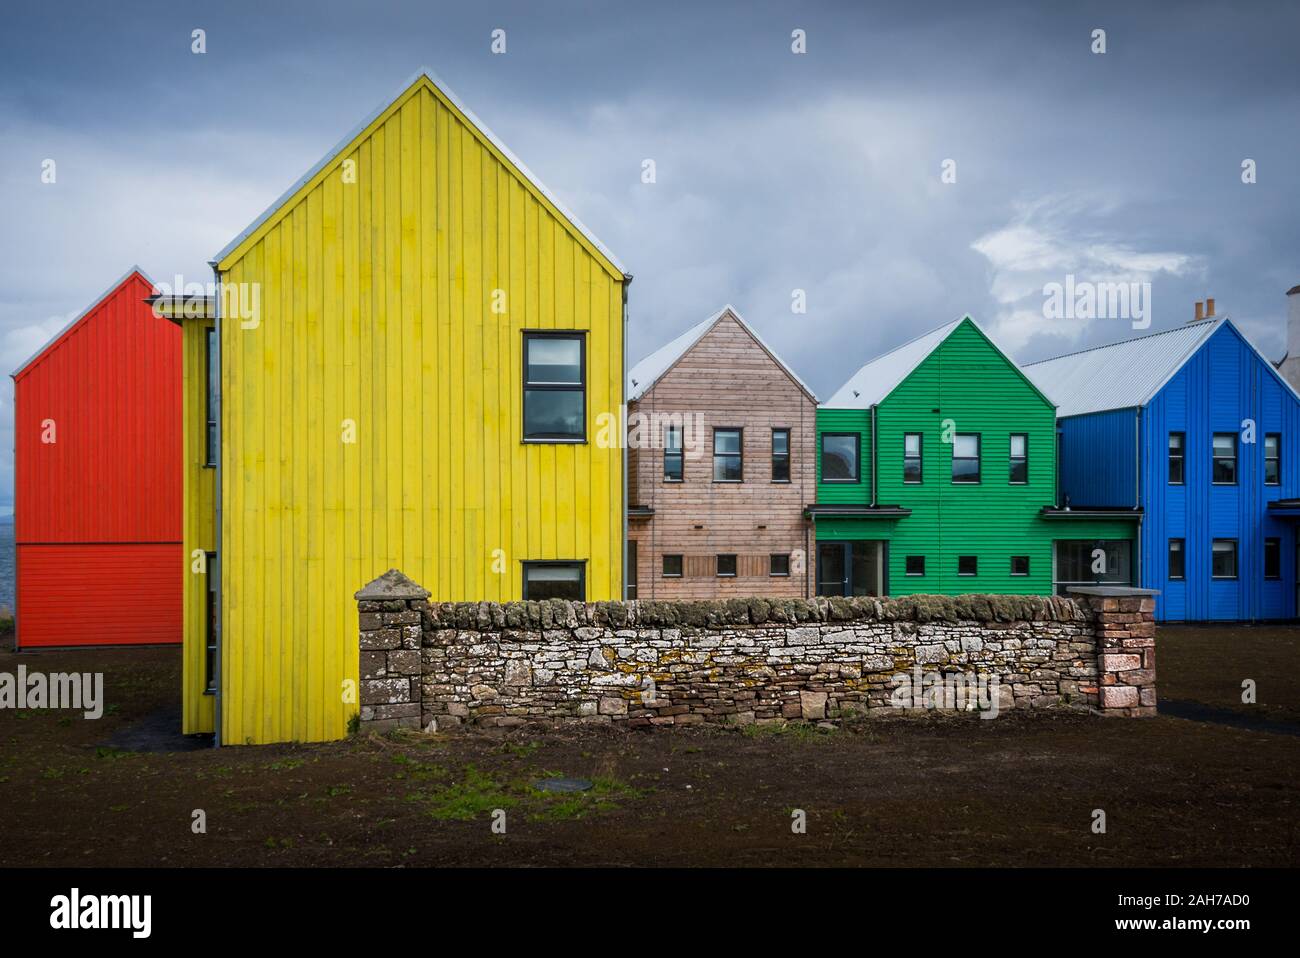 A row of colorful wooden houses in northern Scotland under a cloudy sky Stock Photo